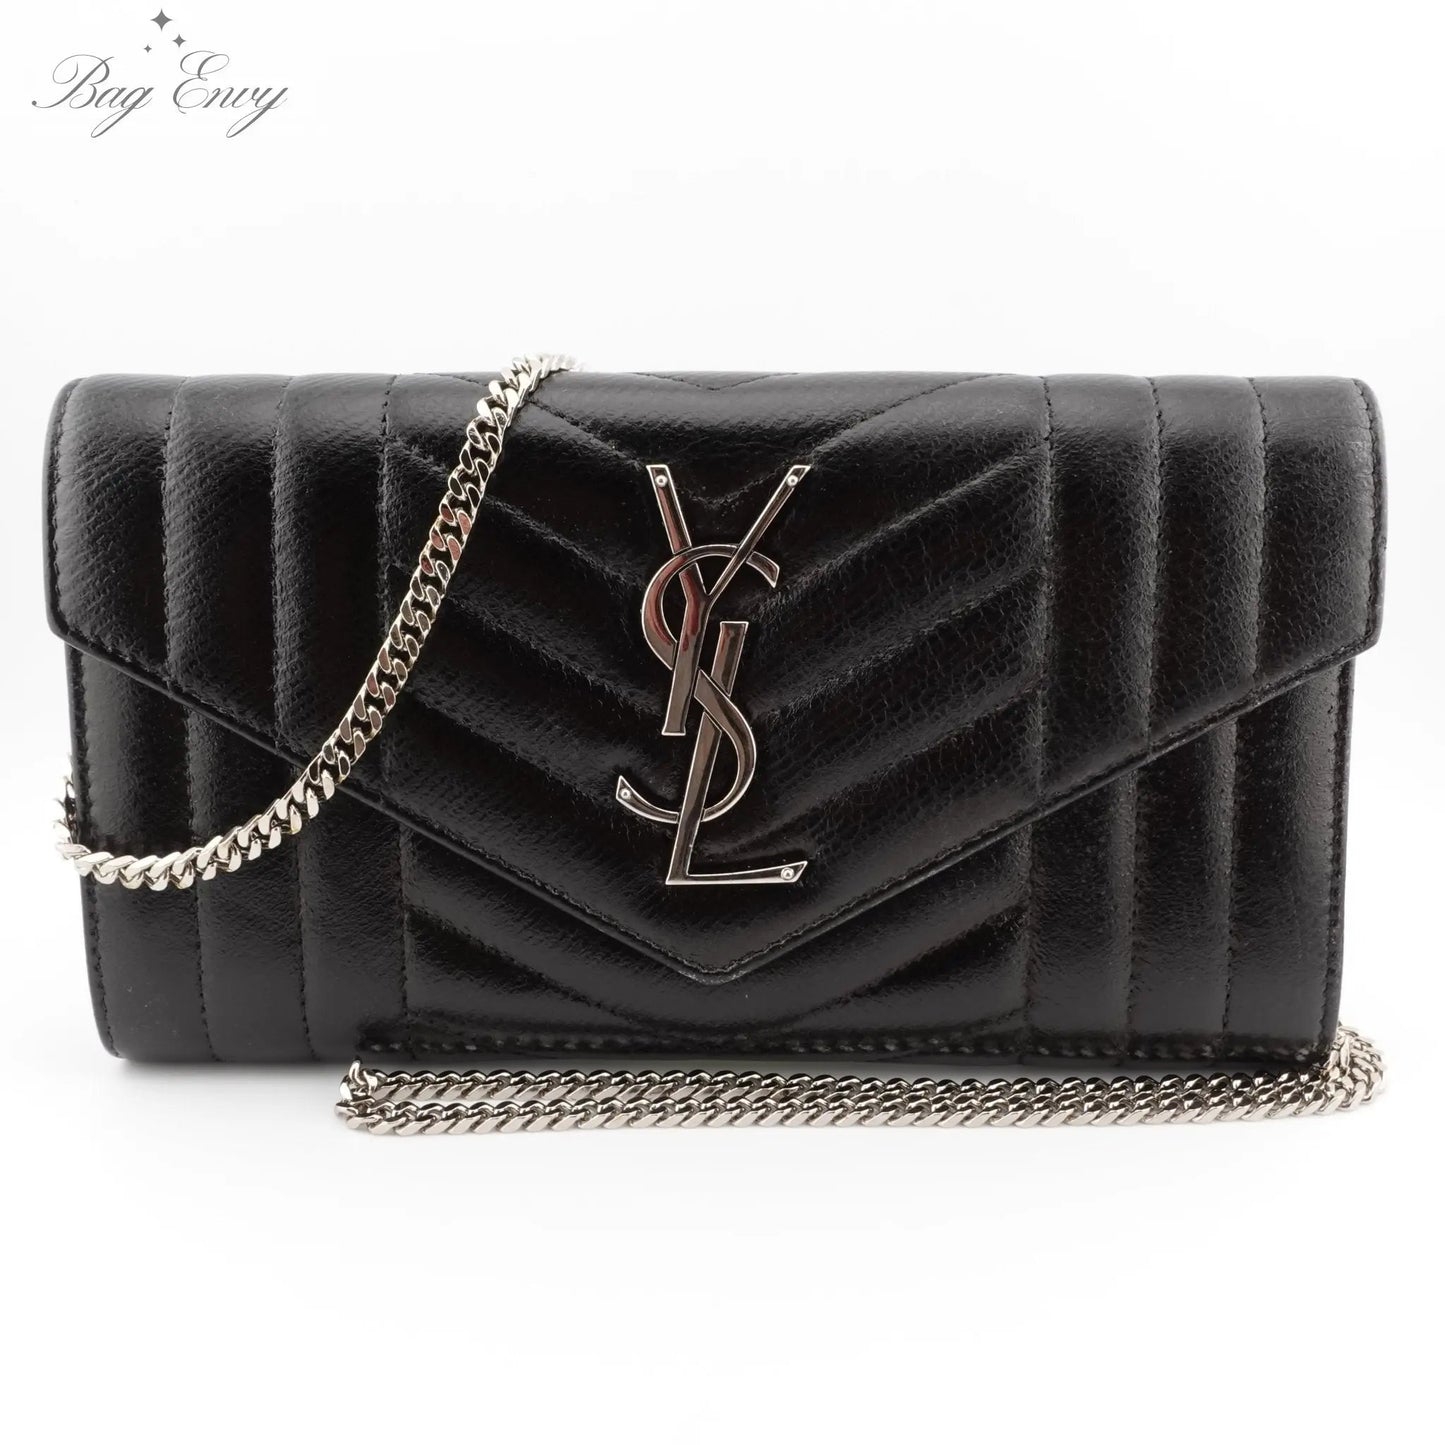 SAINT LAURENT Lambskin Mixed Matelasse Quilted Wallet on Chain - Bag Envy